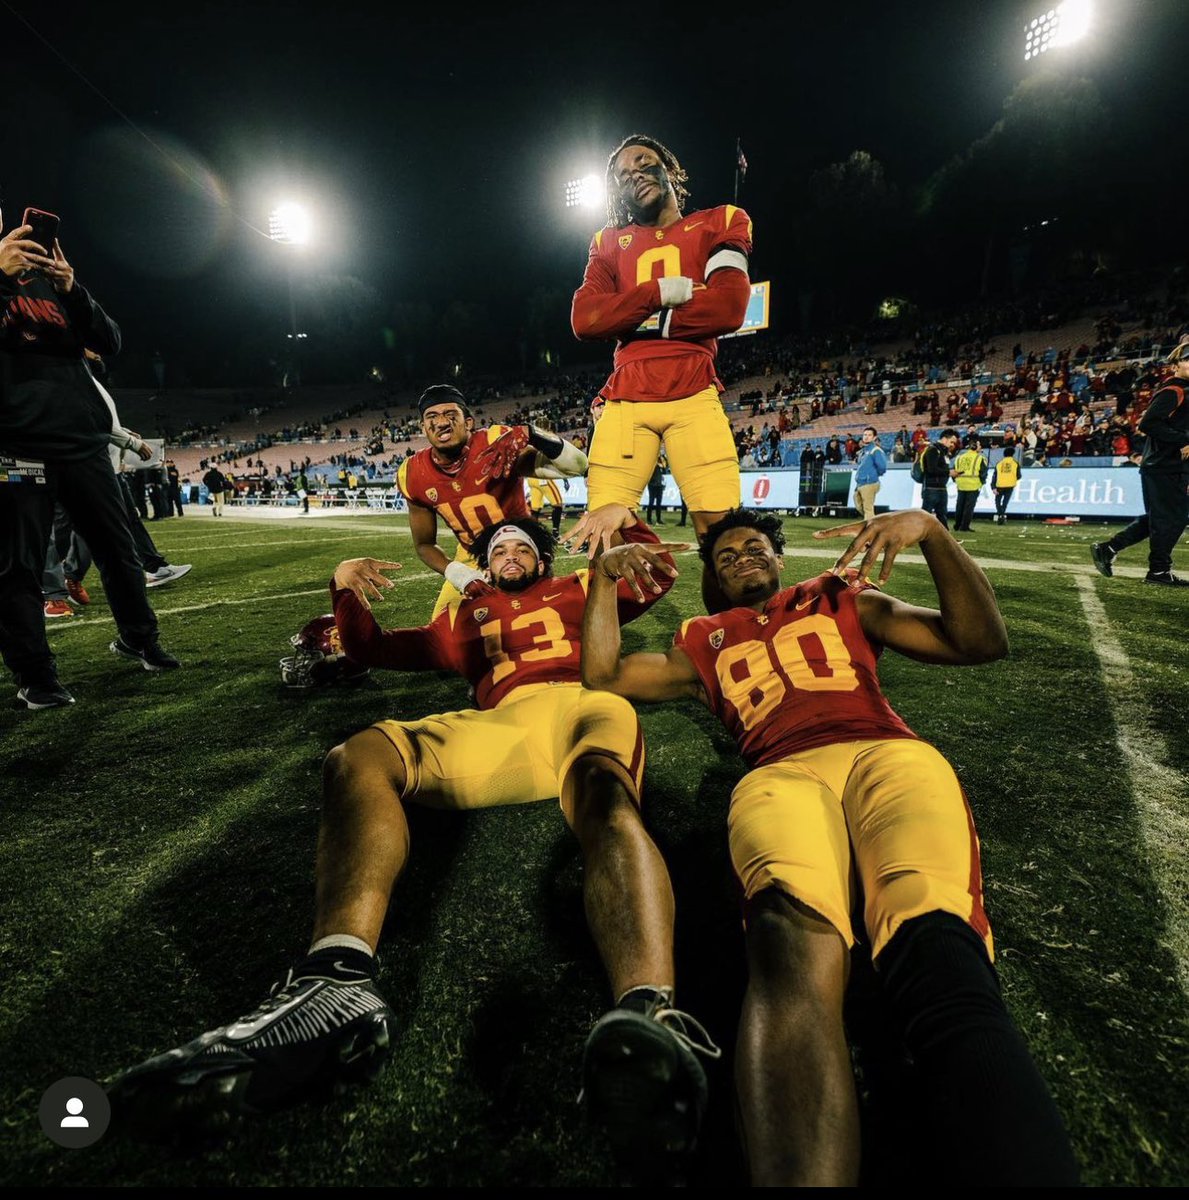 God is Great! I am so blessed to Receive An Offer From The University Of Southern California! @Coach_Henson @USC_Athletics @uscfb @LincolnRiley @gray_reed77 @SumnerHSFootbal @HCPS_SumnerHS @AlonzoAshwood @BigPlayRay50 @CaliPowerATHs @ChadSimmons_ @adamgorney